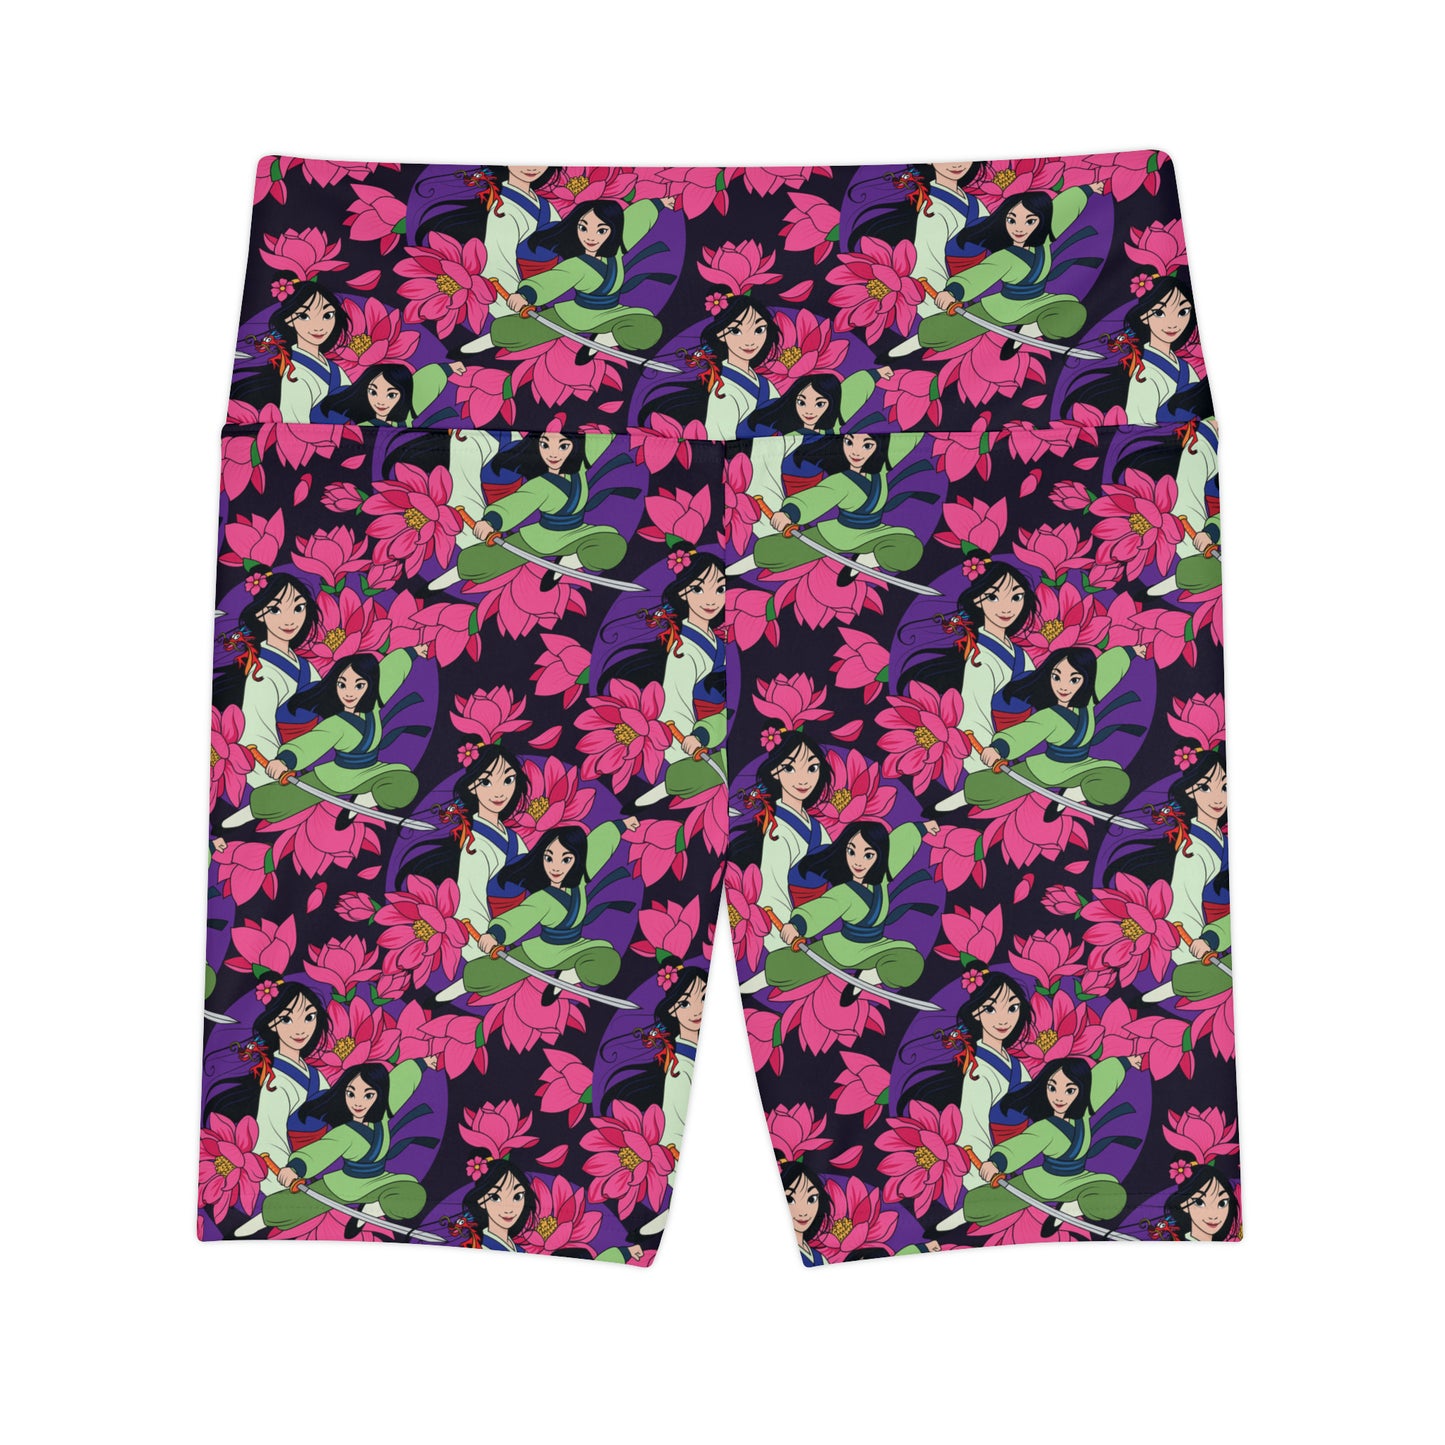 Blooming Flowers Women's Athletic Workout Shorts